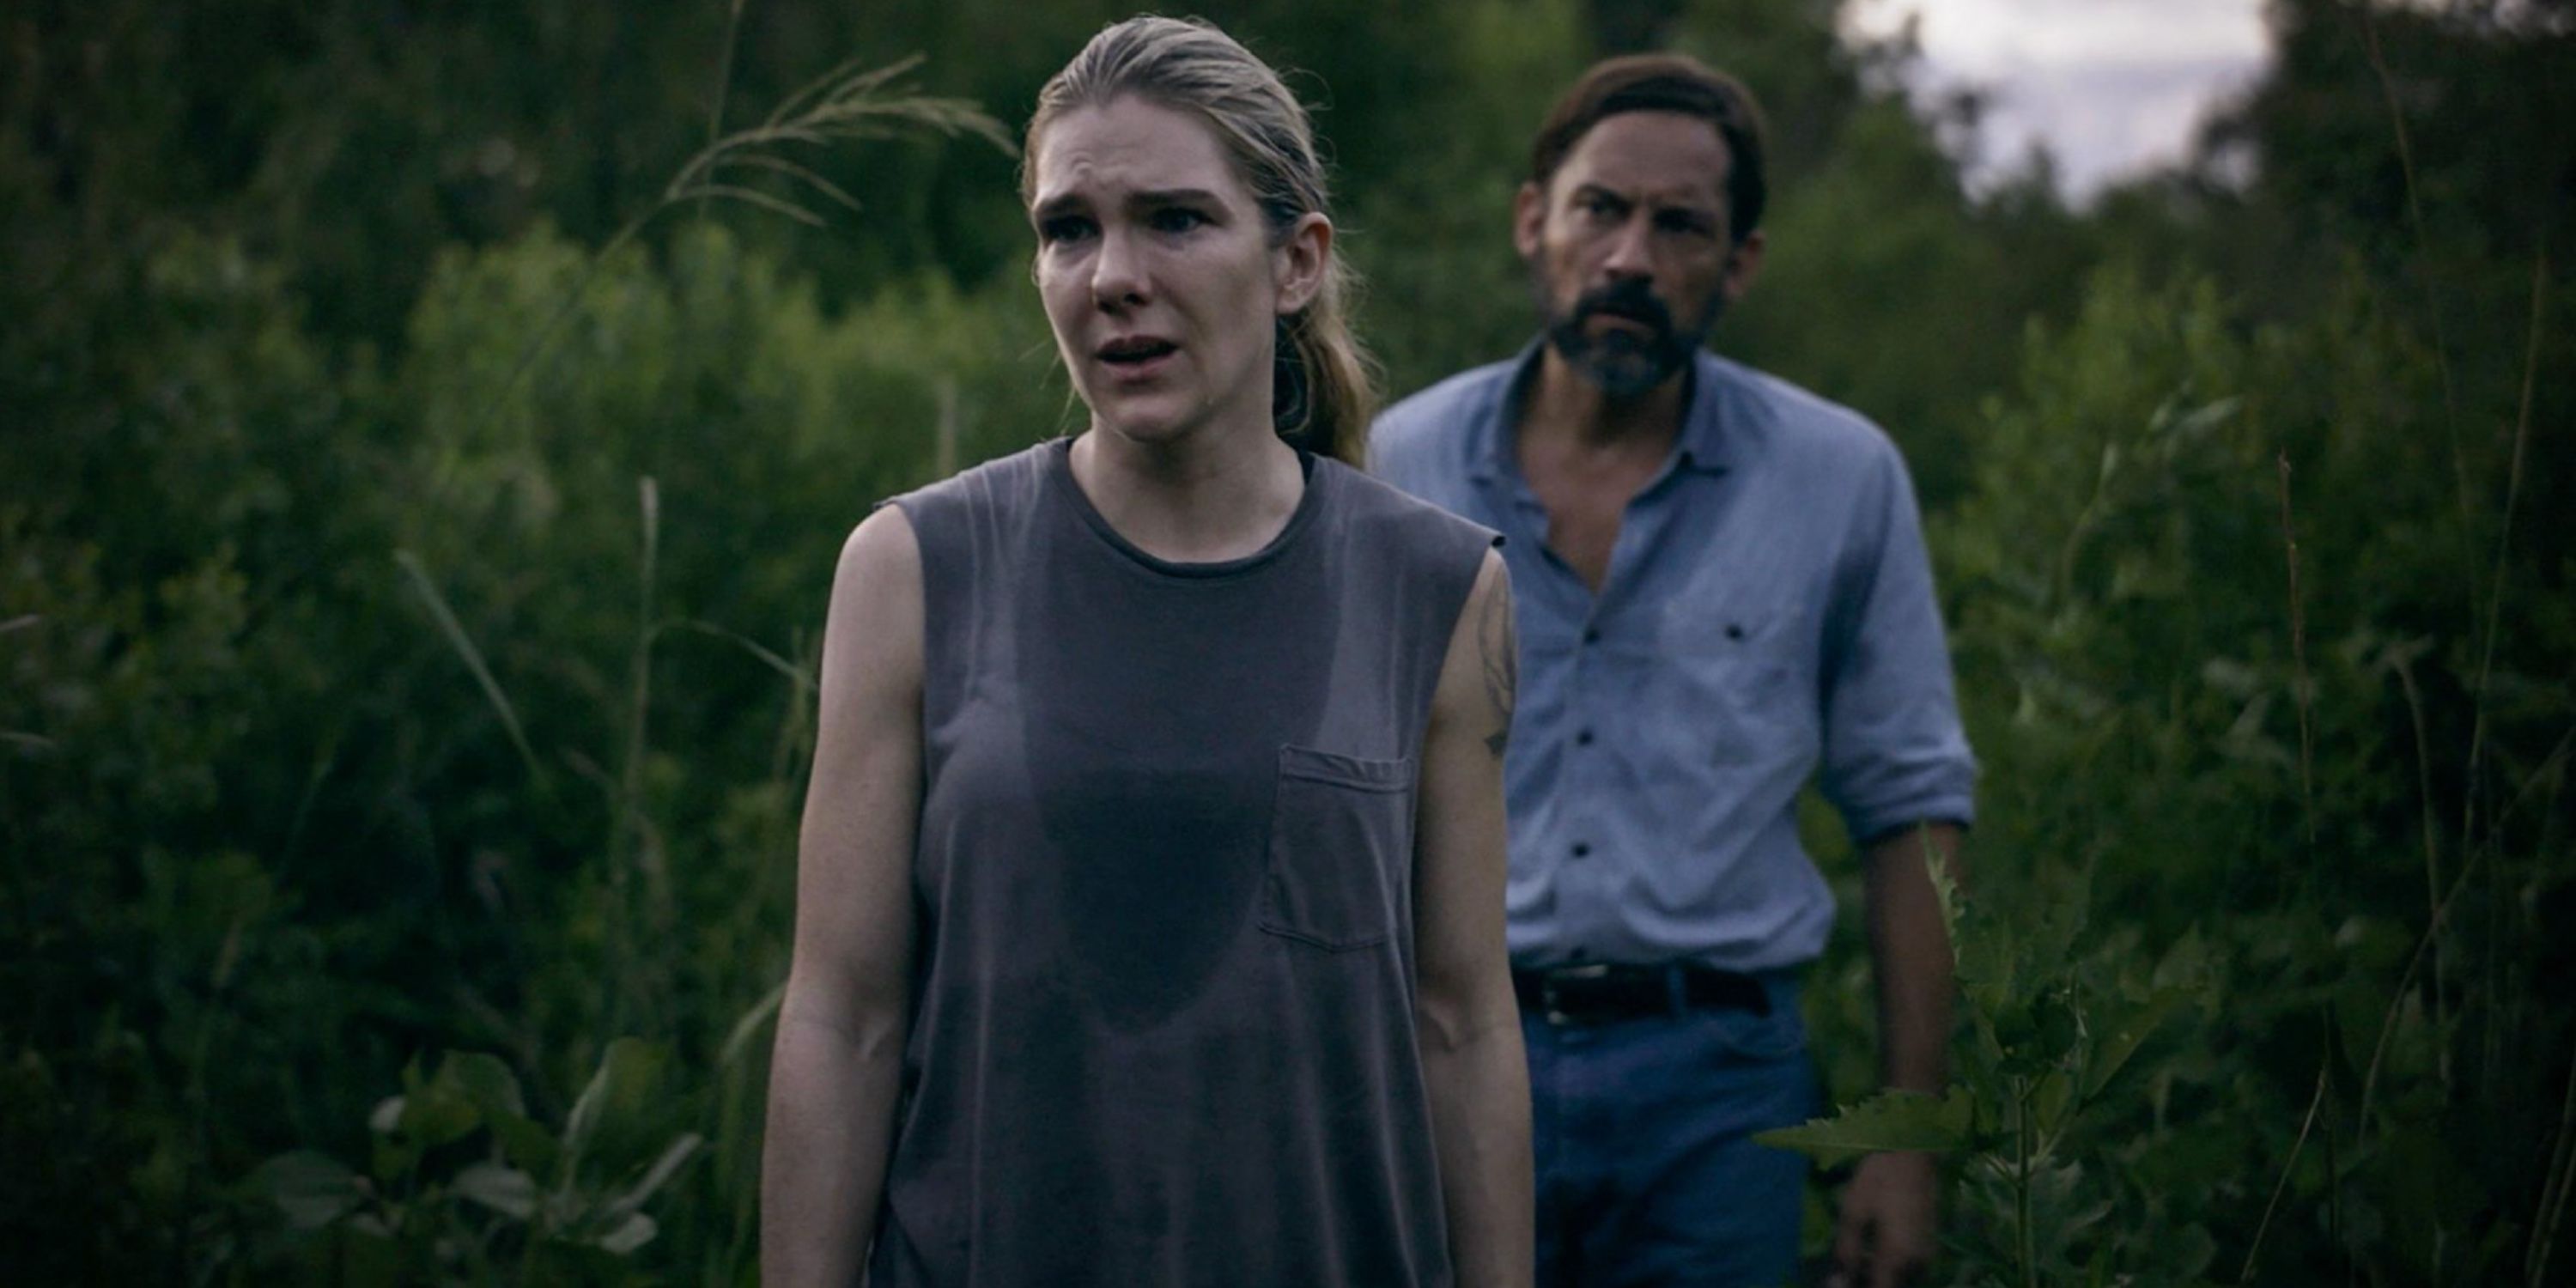 Lily Rabe and Enrique Murciano in Tell Me Your Secrets on Amazon Prime